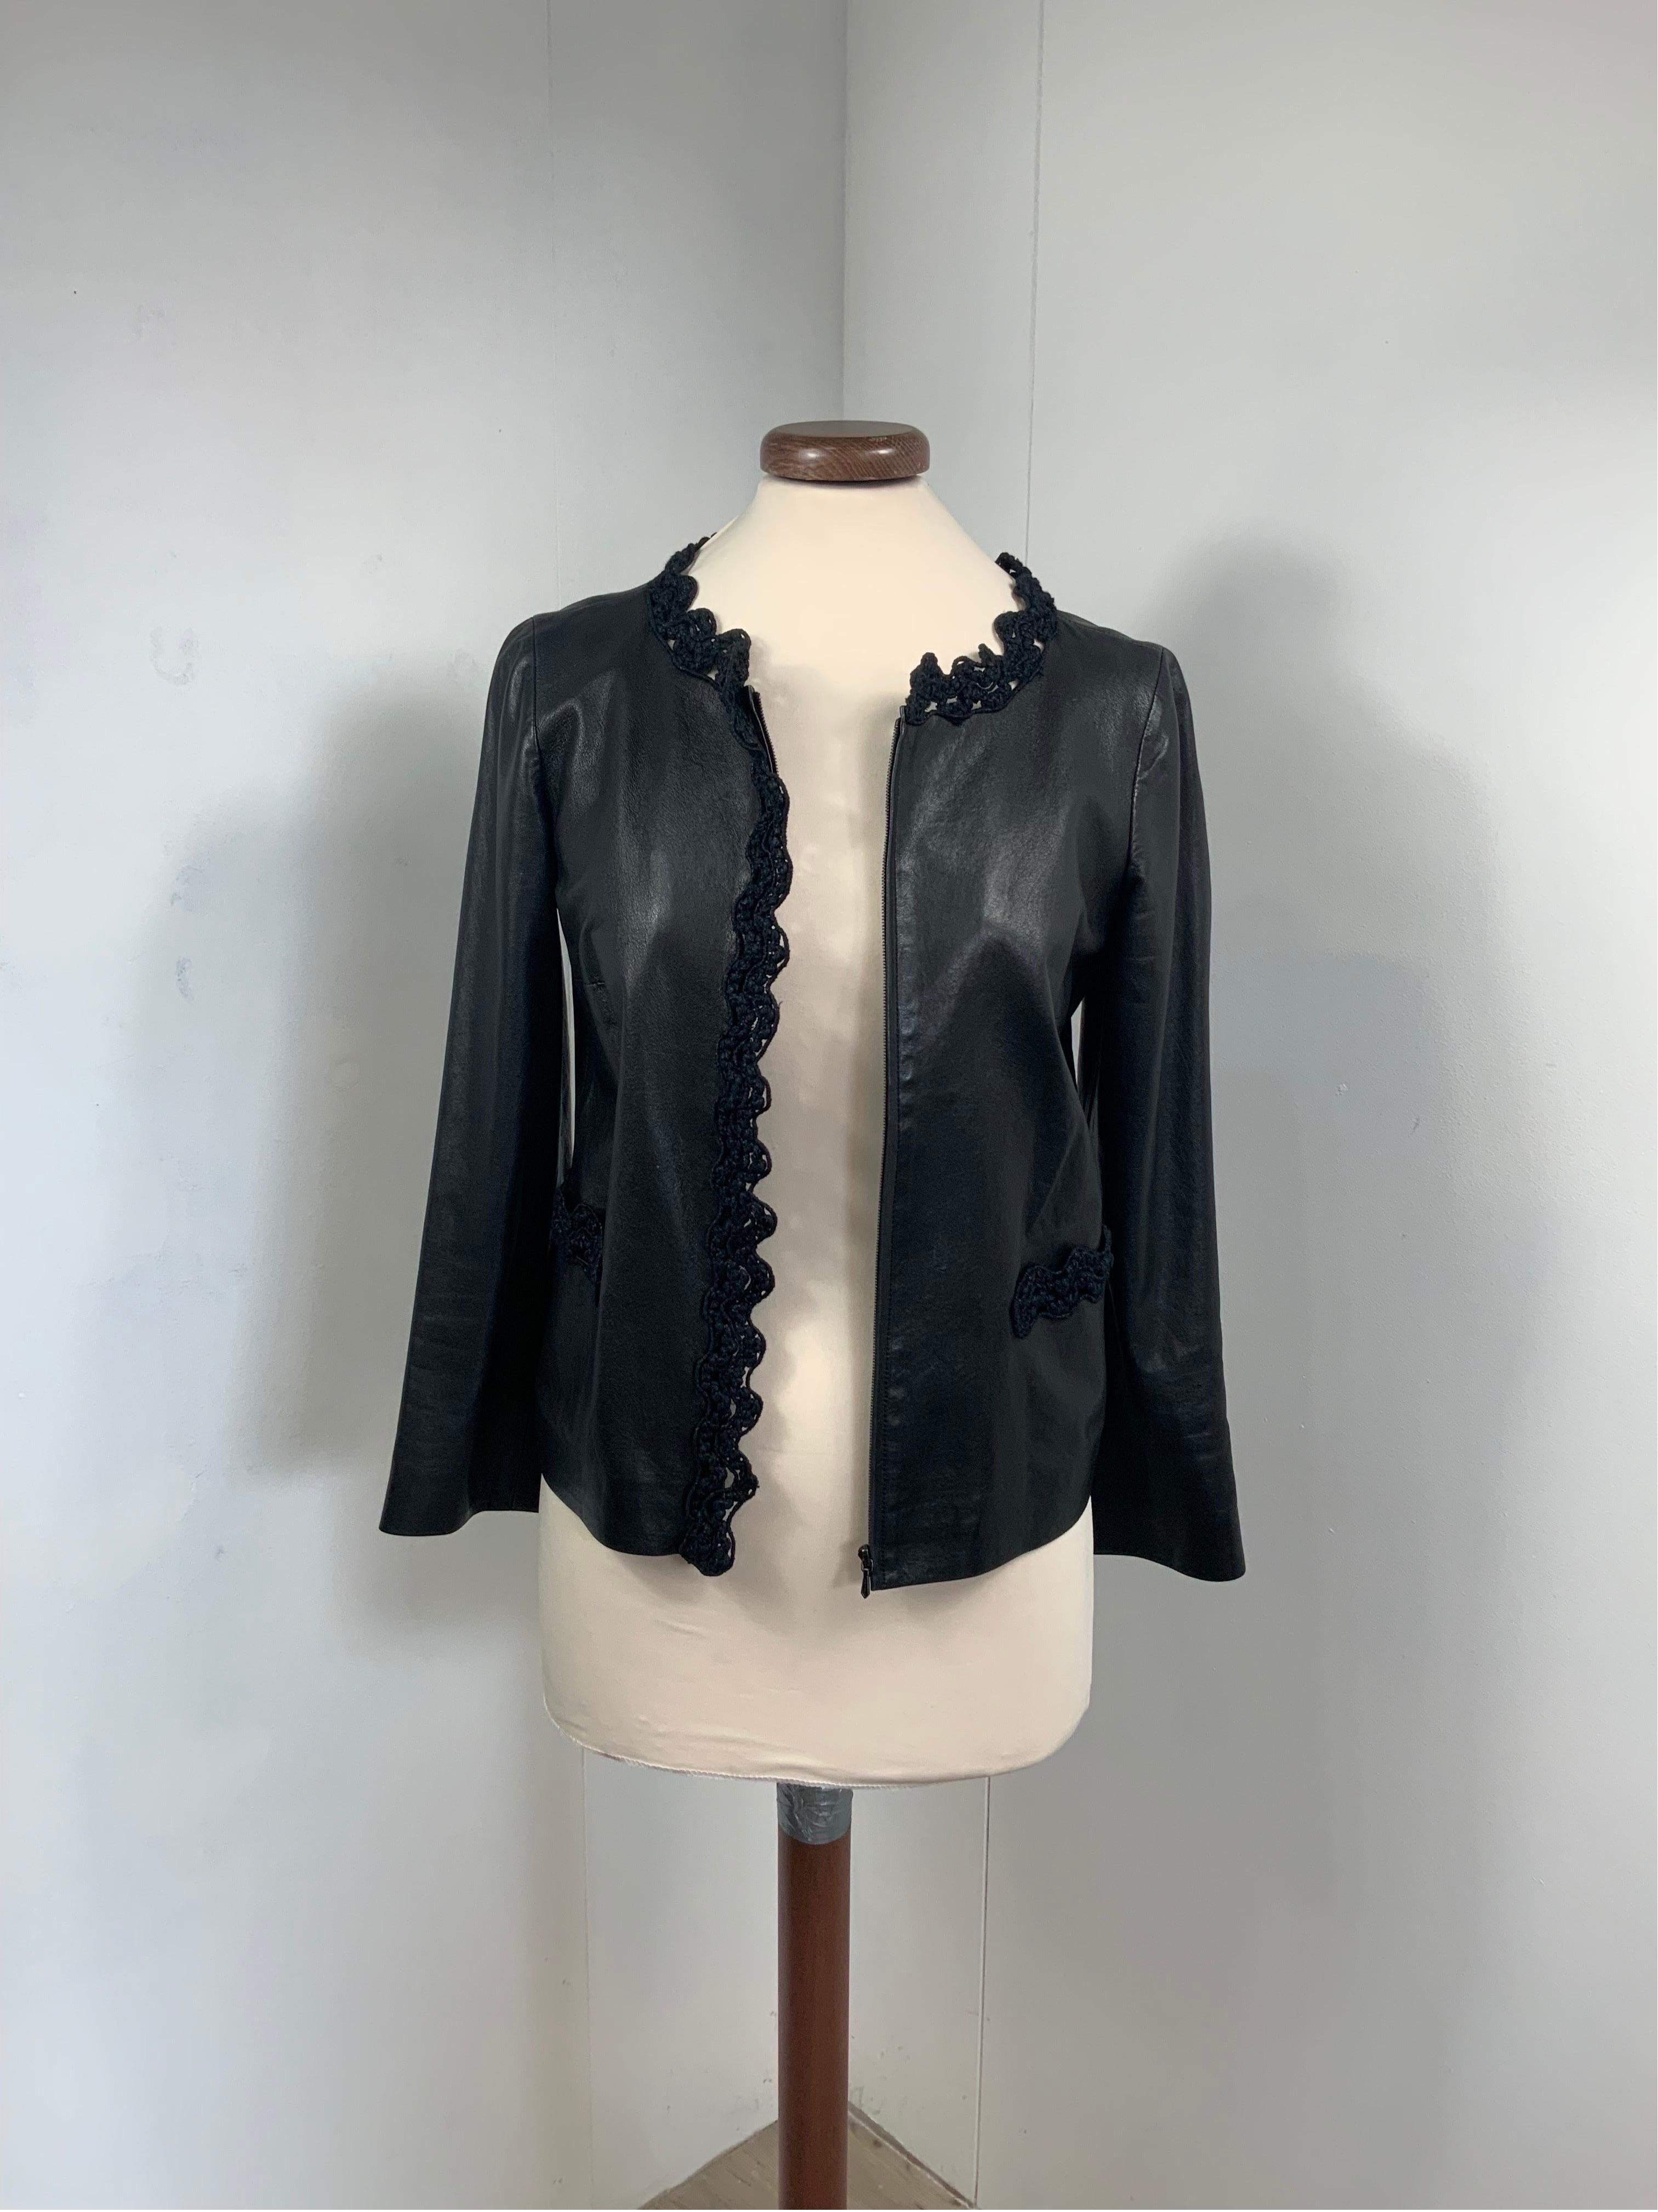 Chanel leather jacket.
Featuring very soft lambskin leather. Fully silk lining. 
Size 34 FR. it fits an Italian 38.
Shoulders 38 cm
Bust 40 cm
Length 54 cm
Sleeves 52 cm
Conditions- excellent 
